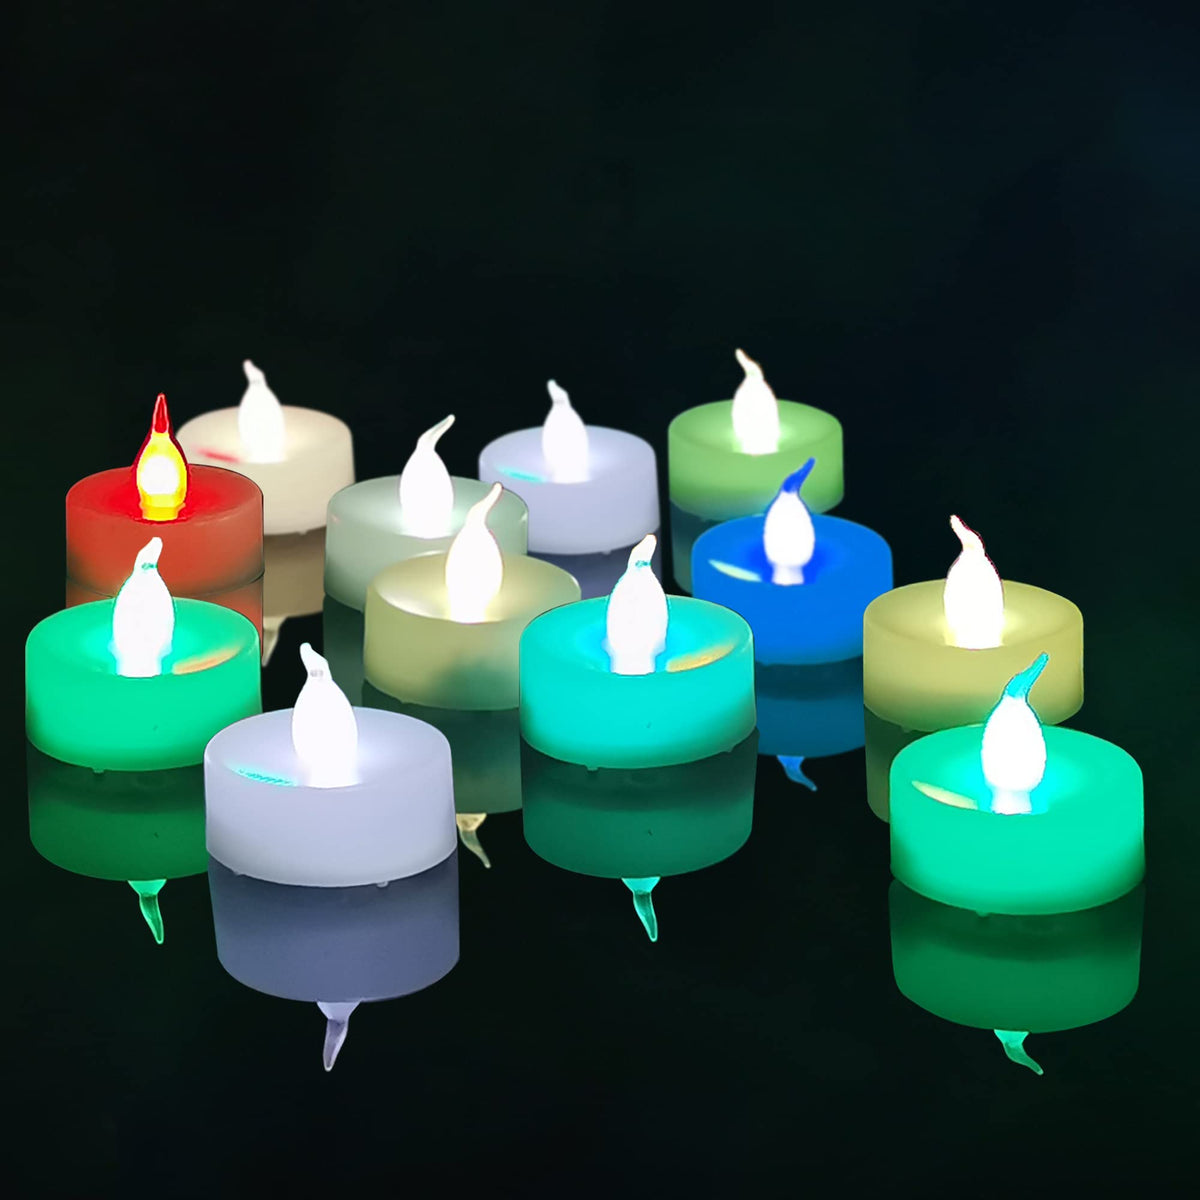 Color Changing Tea Lights Bulk Battery Operated Flameless Colored Tealights Long Lasting LED Flickering Fake Candles for Christmas Halloween Home